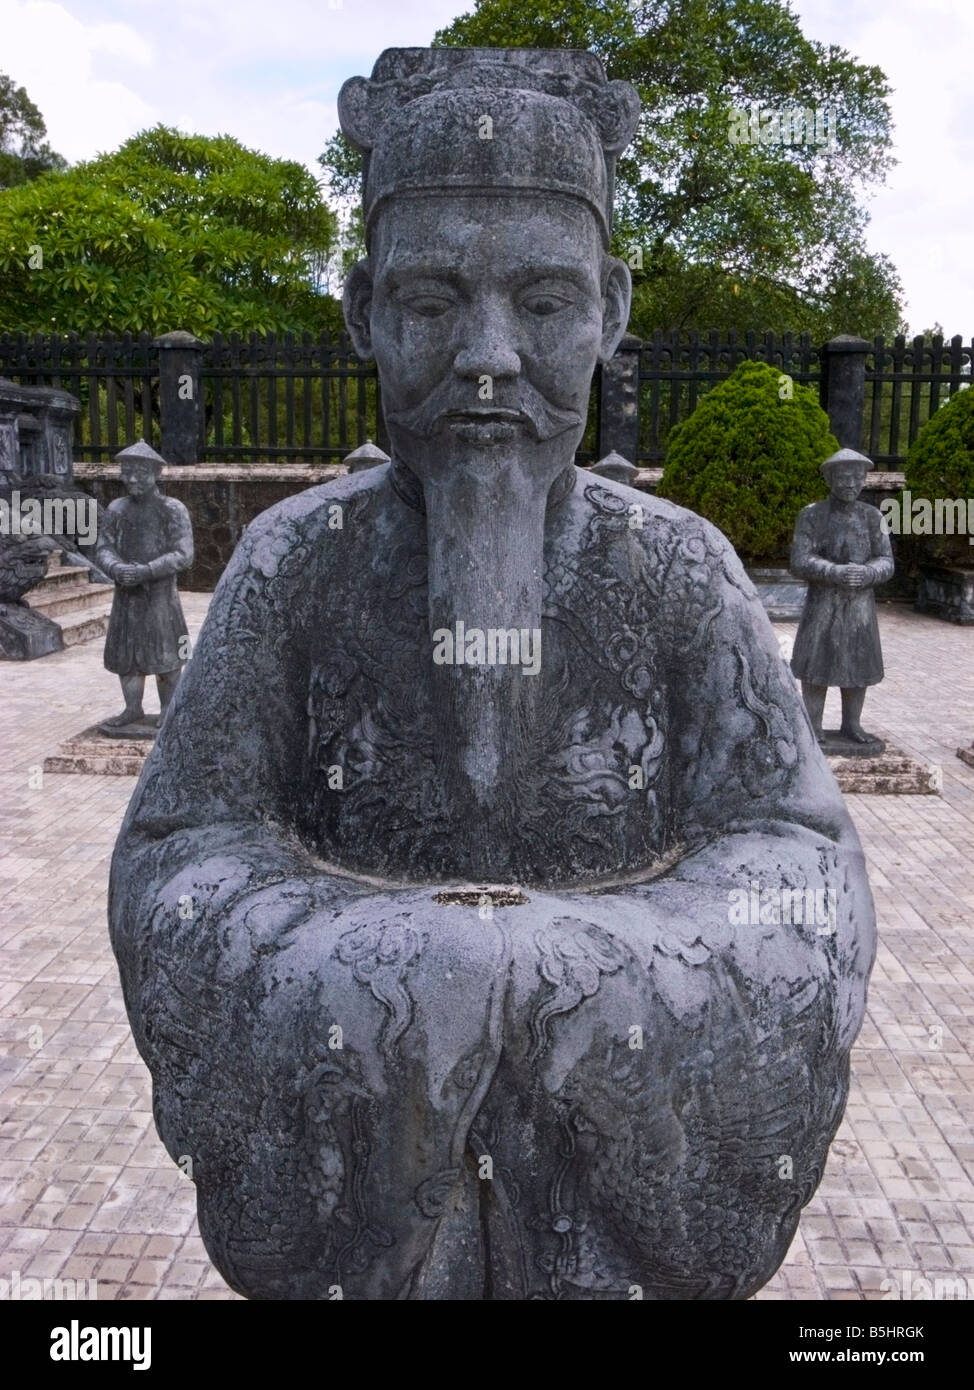 Stone figure at tomb of Khai Dinh last Emperor of the Nguyen dynasty, near Hue Vietnam Stock Photo